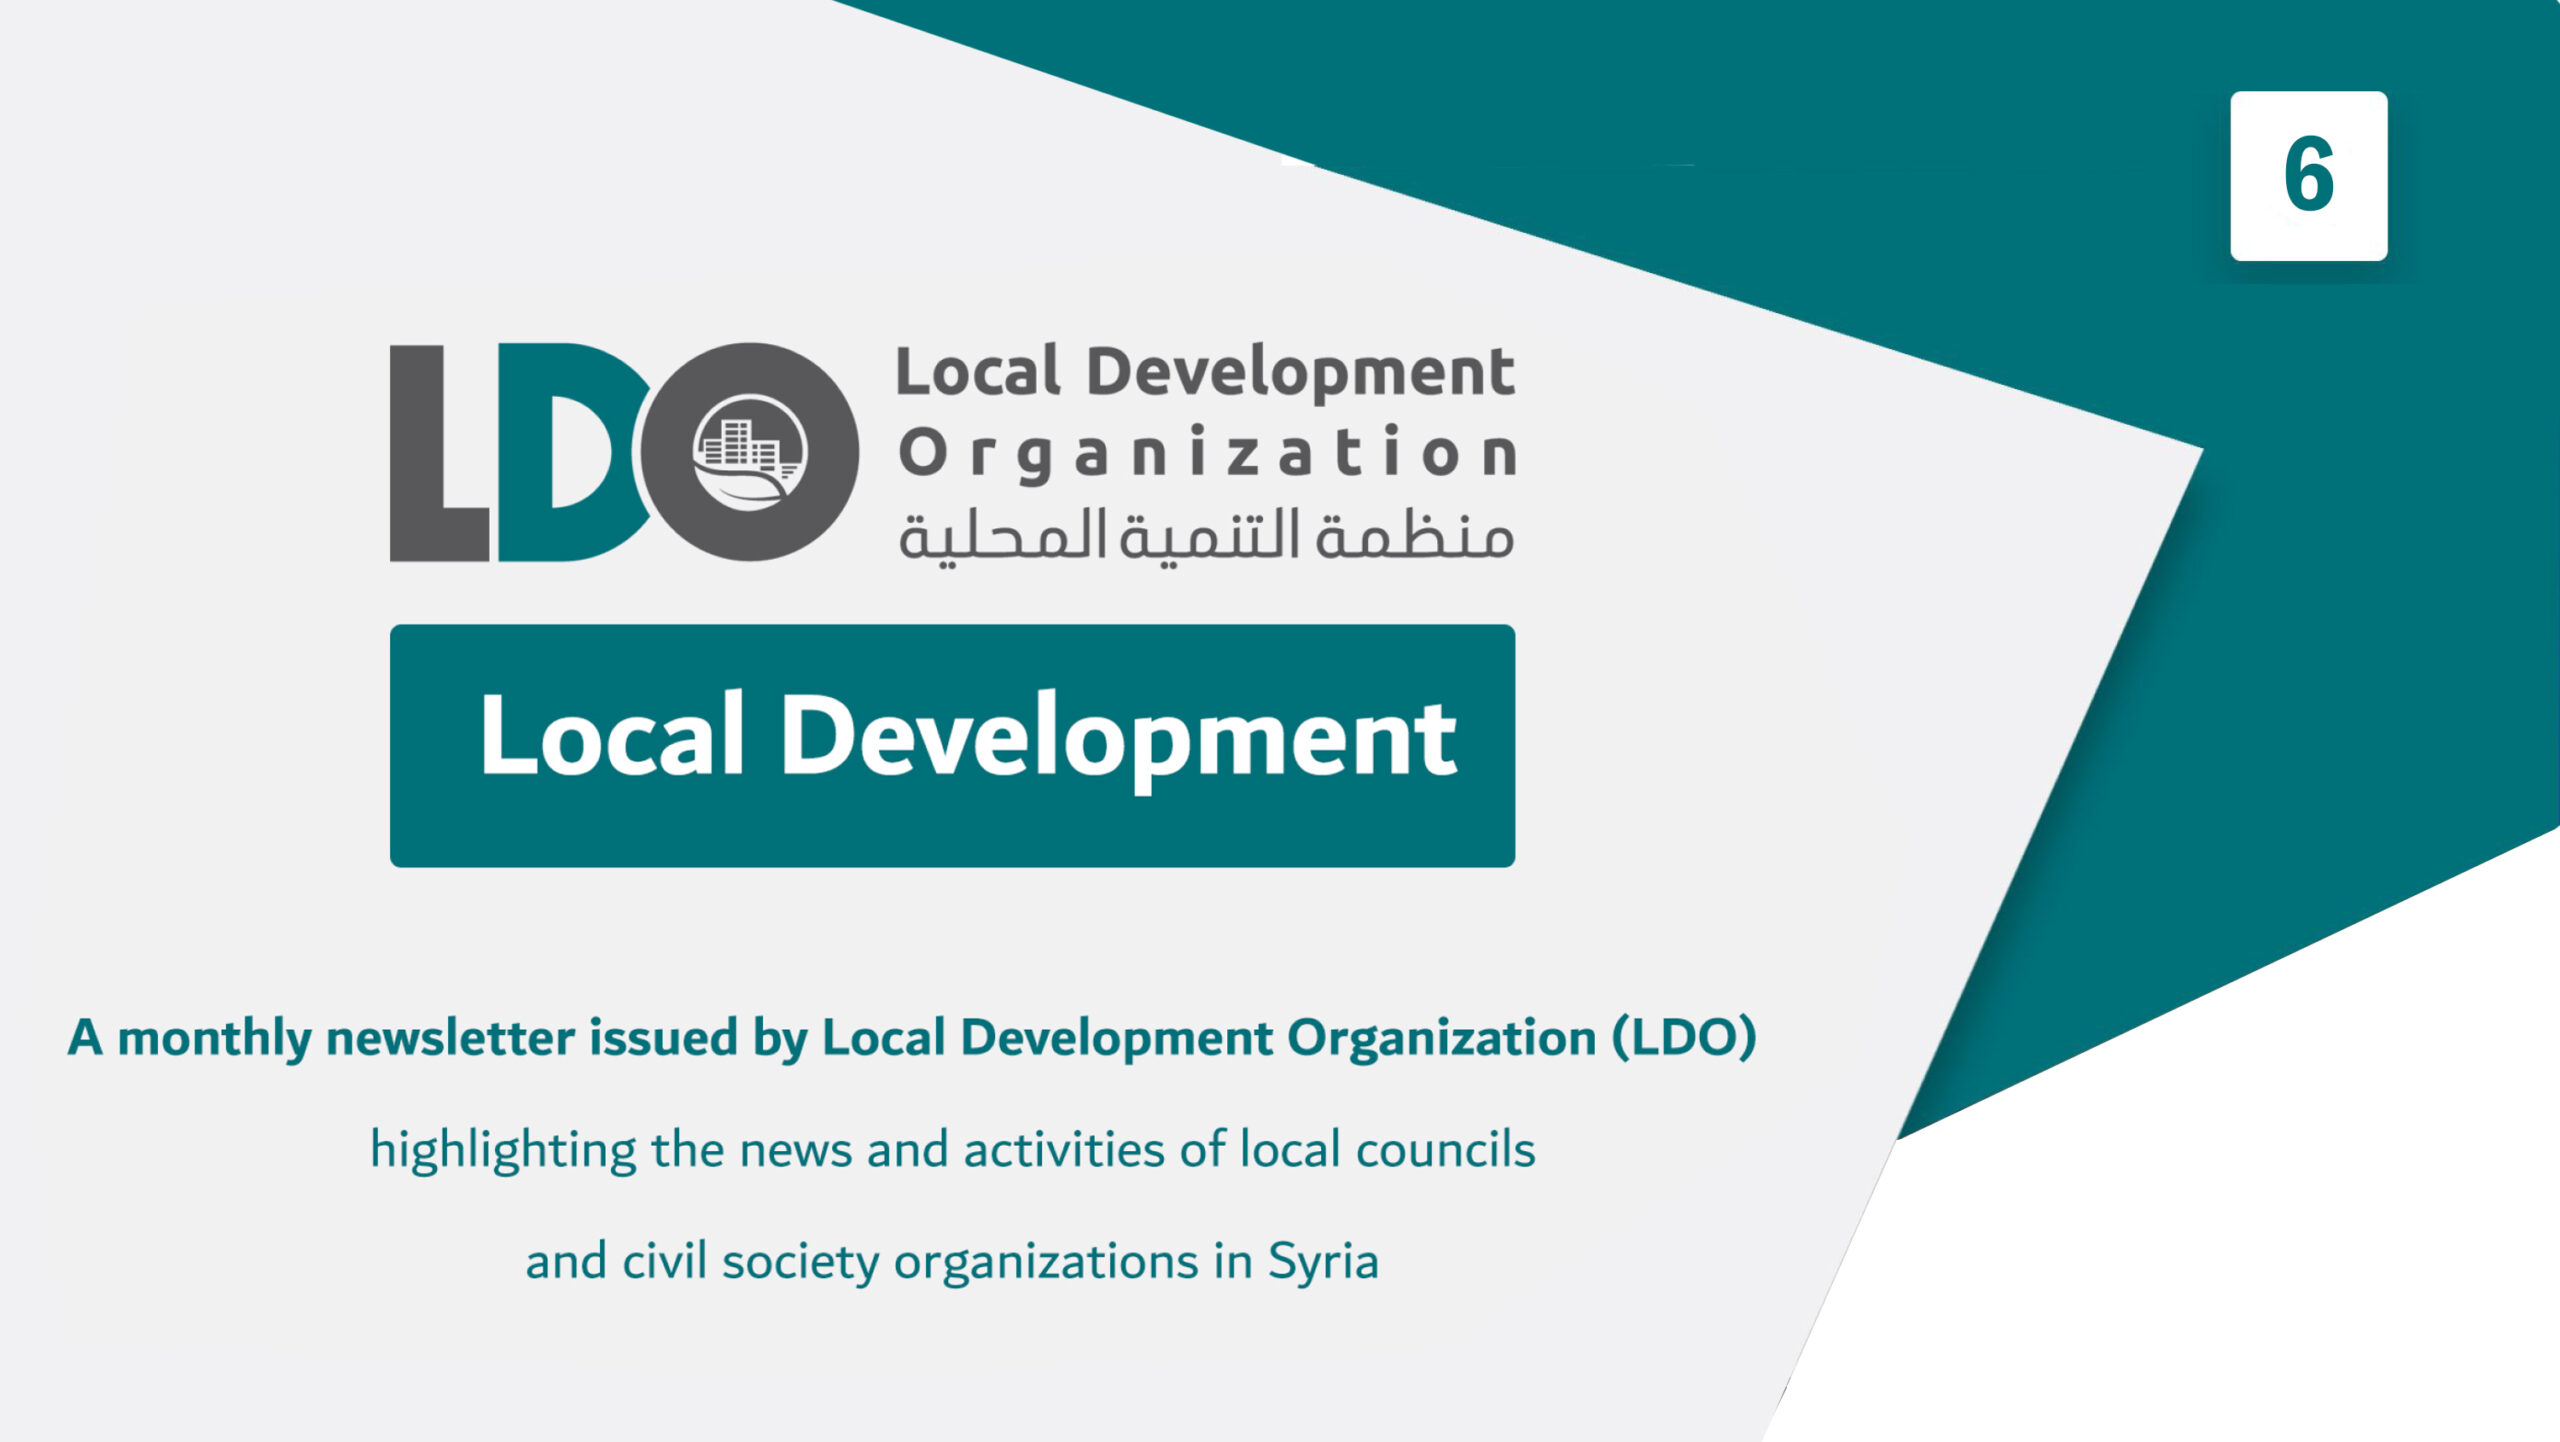 The Sixth issue - Local Development